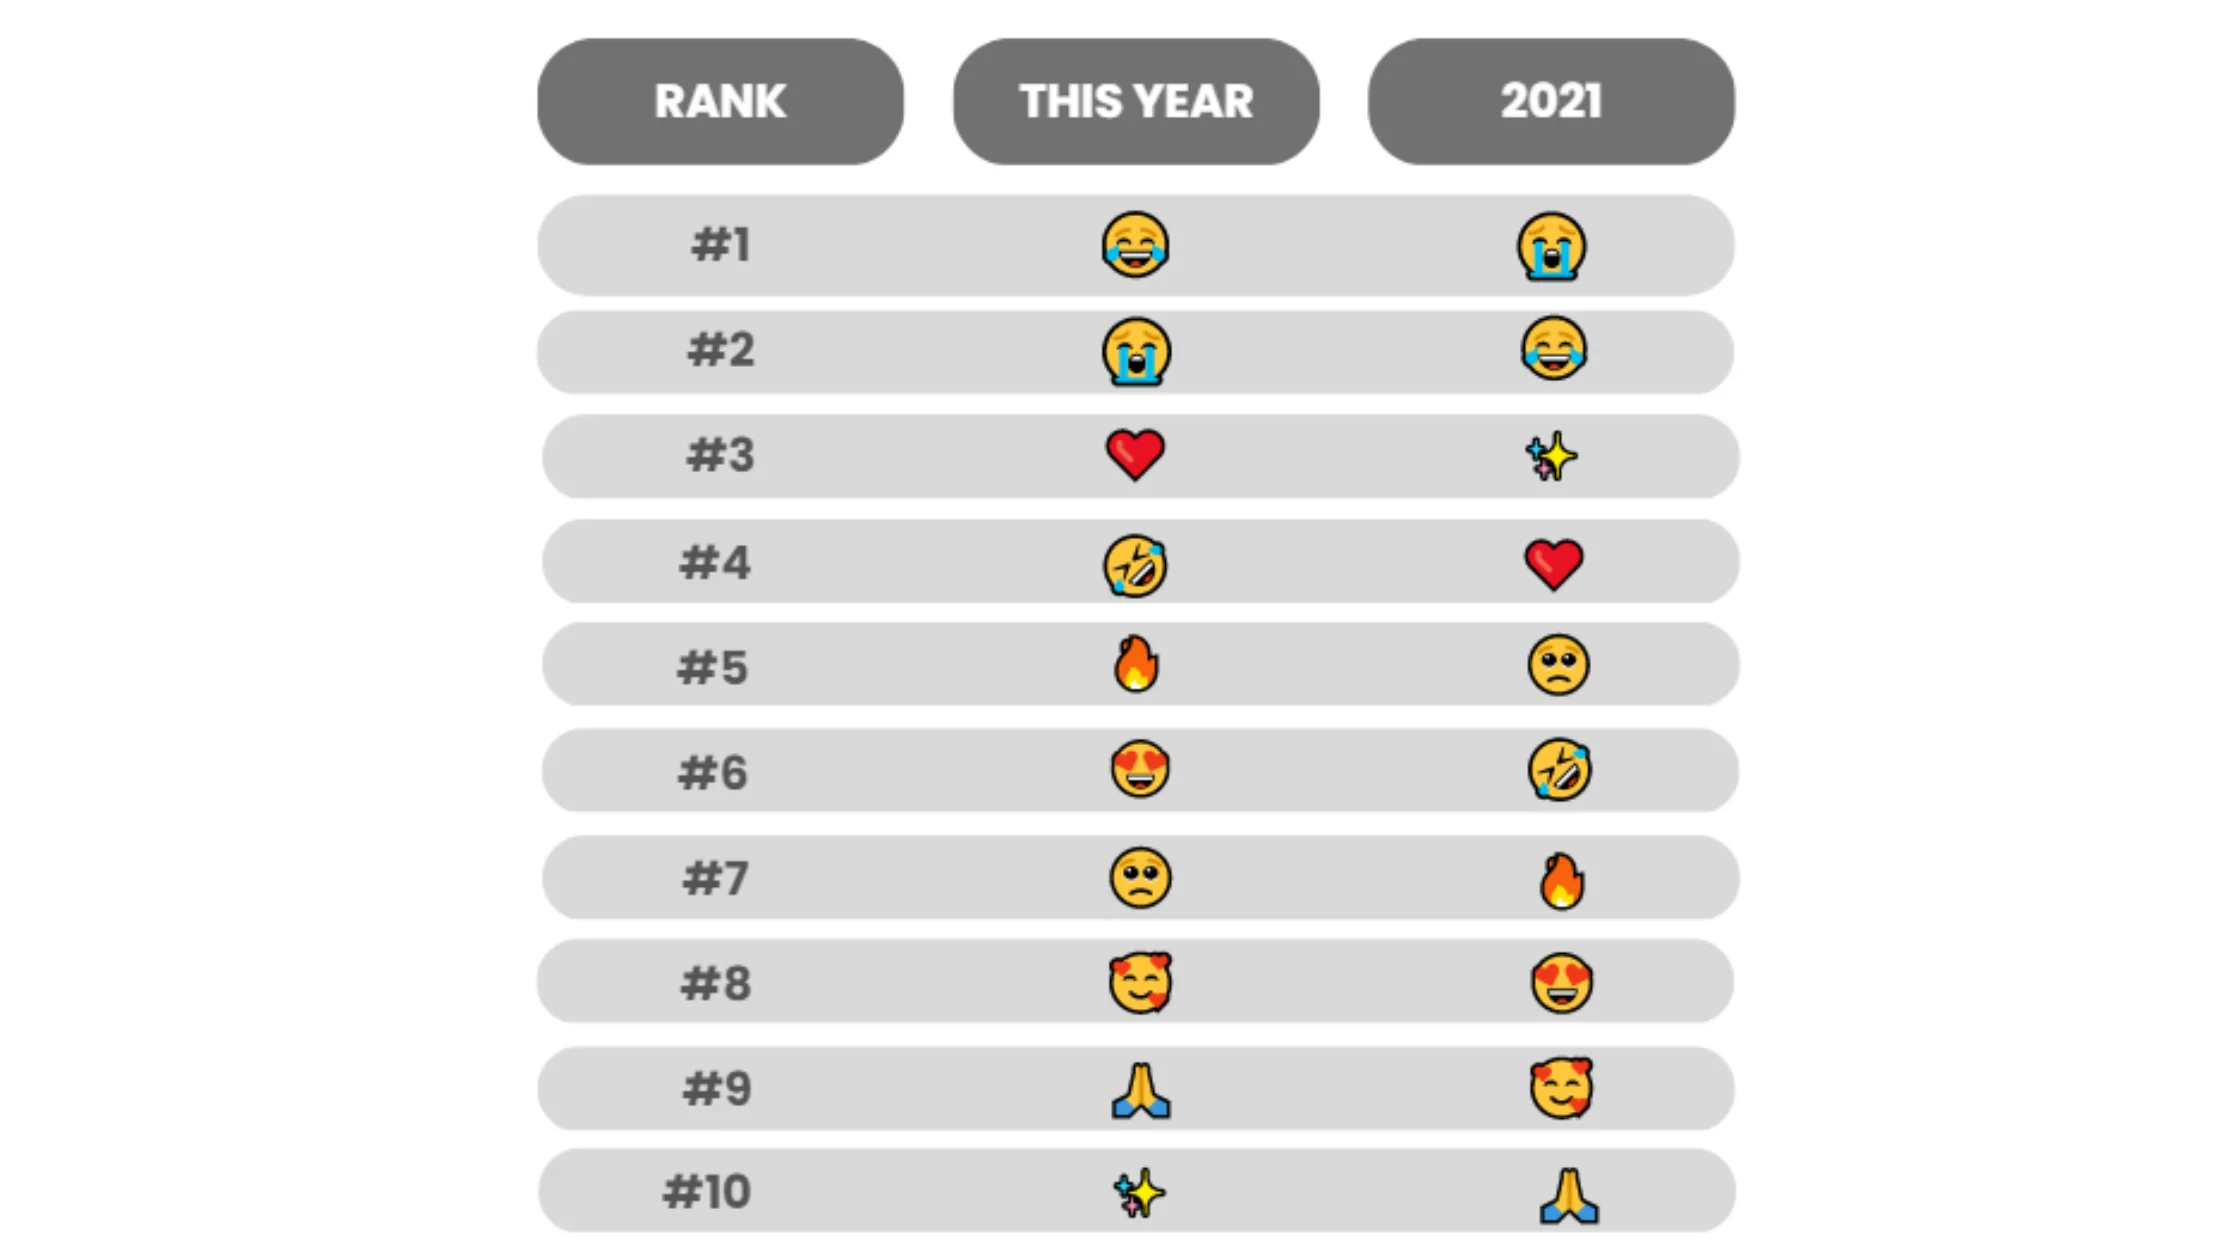 Top 10 Most Popular Emojis in 2023 compared to 2021